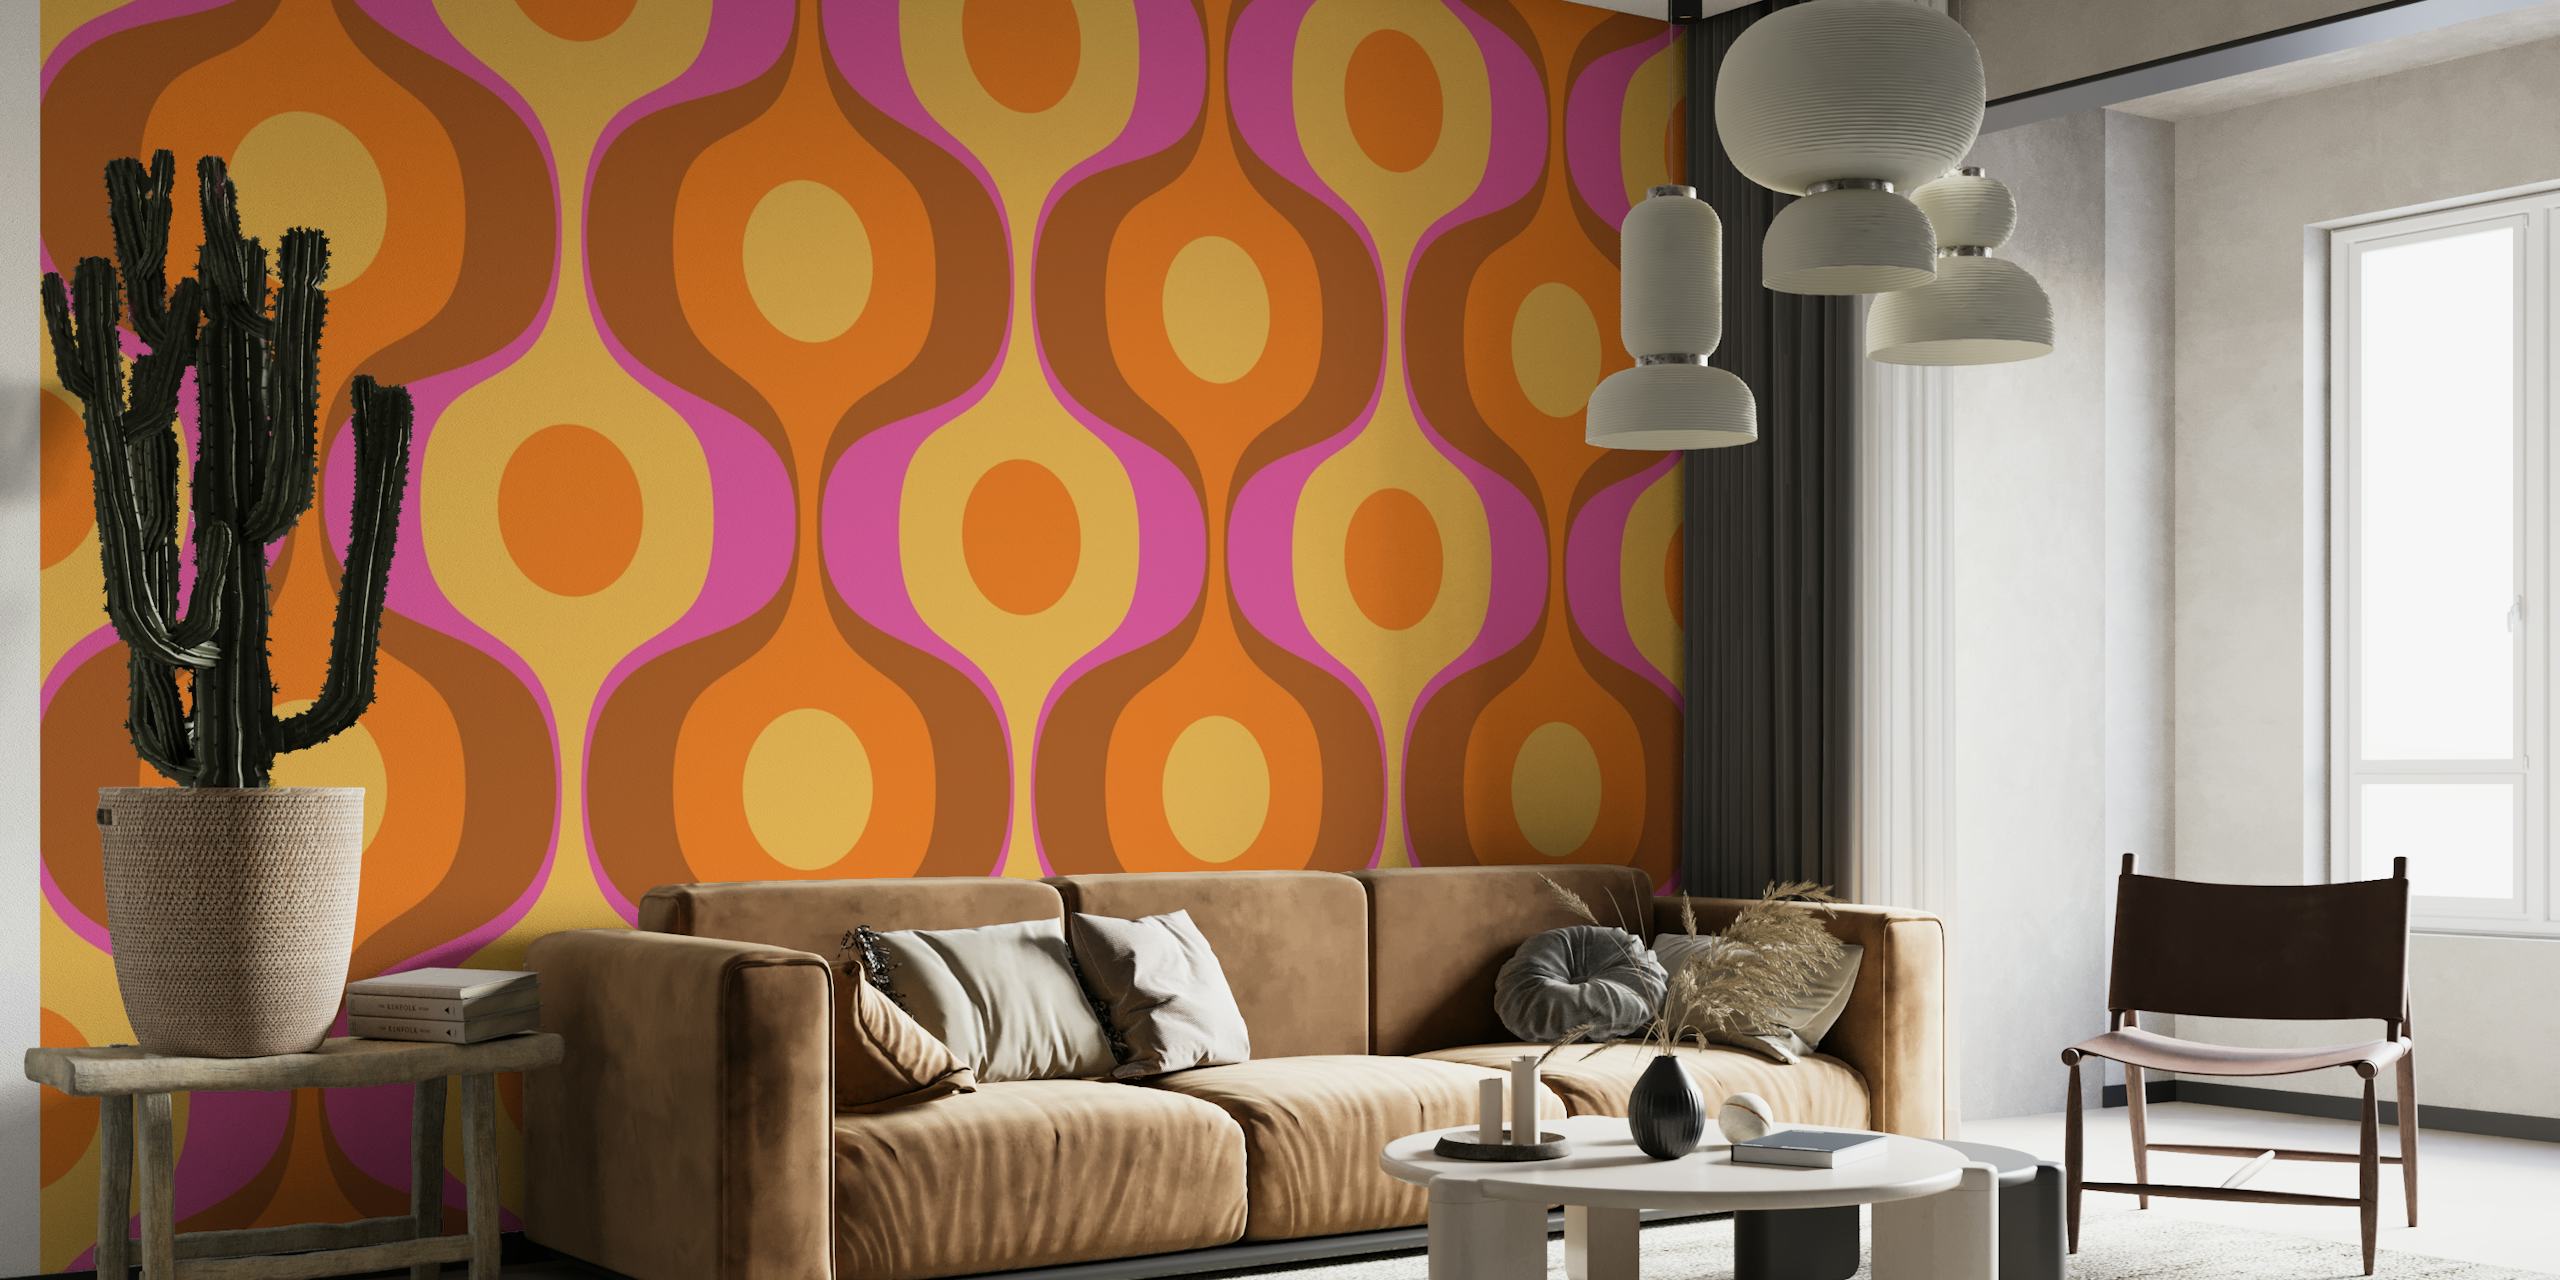 Vivid retro-inspired wall mural featuring abstract geometric waves in terracotta, mustard, and mauve